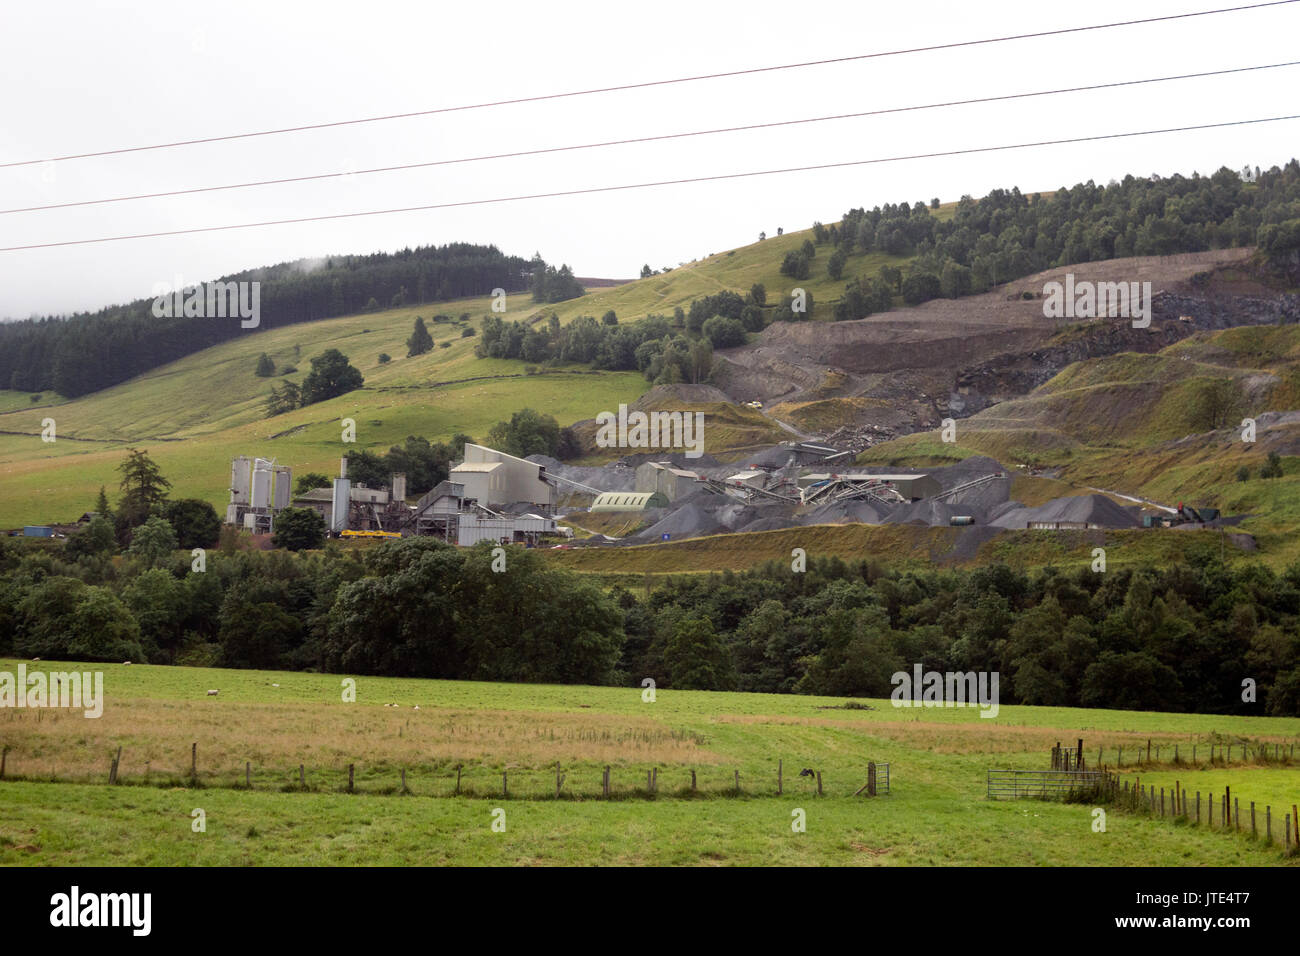 Scotland, Highlands, Scottish Landscape, Trees, Field, Rural Countryside,  Bushes and Shrubbery, Overcast Weather, Industry, Excavation Stock Photo